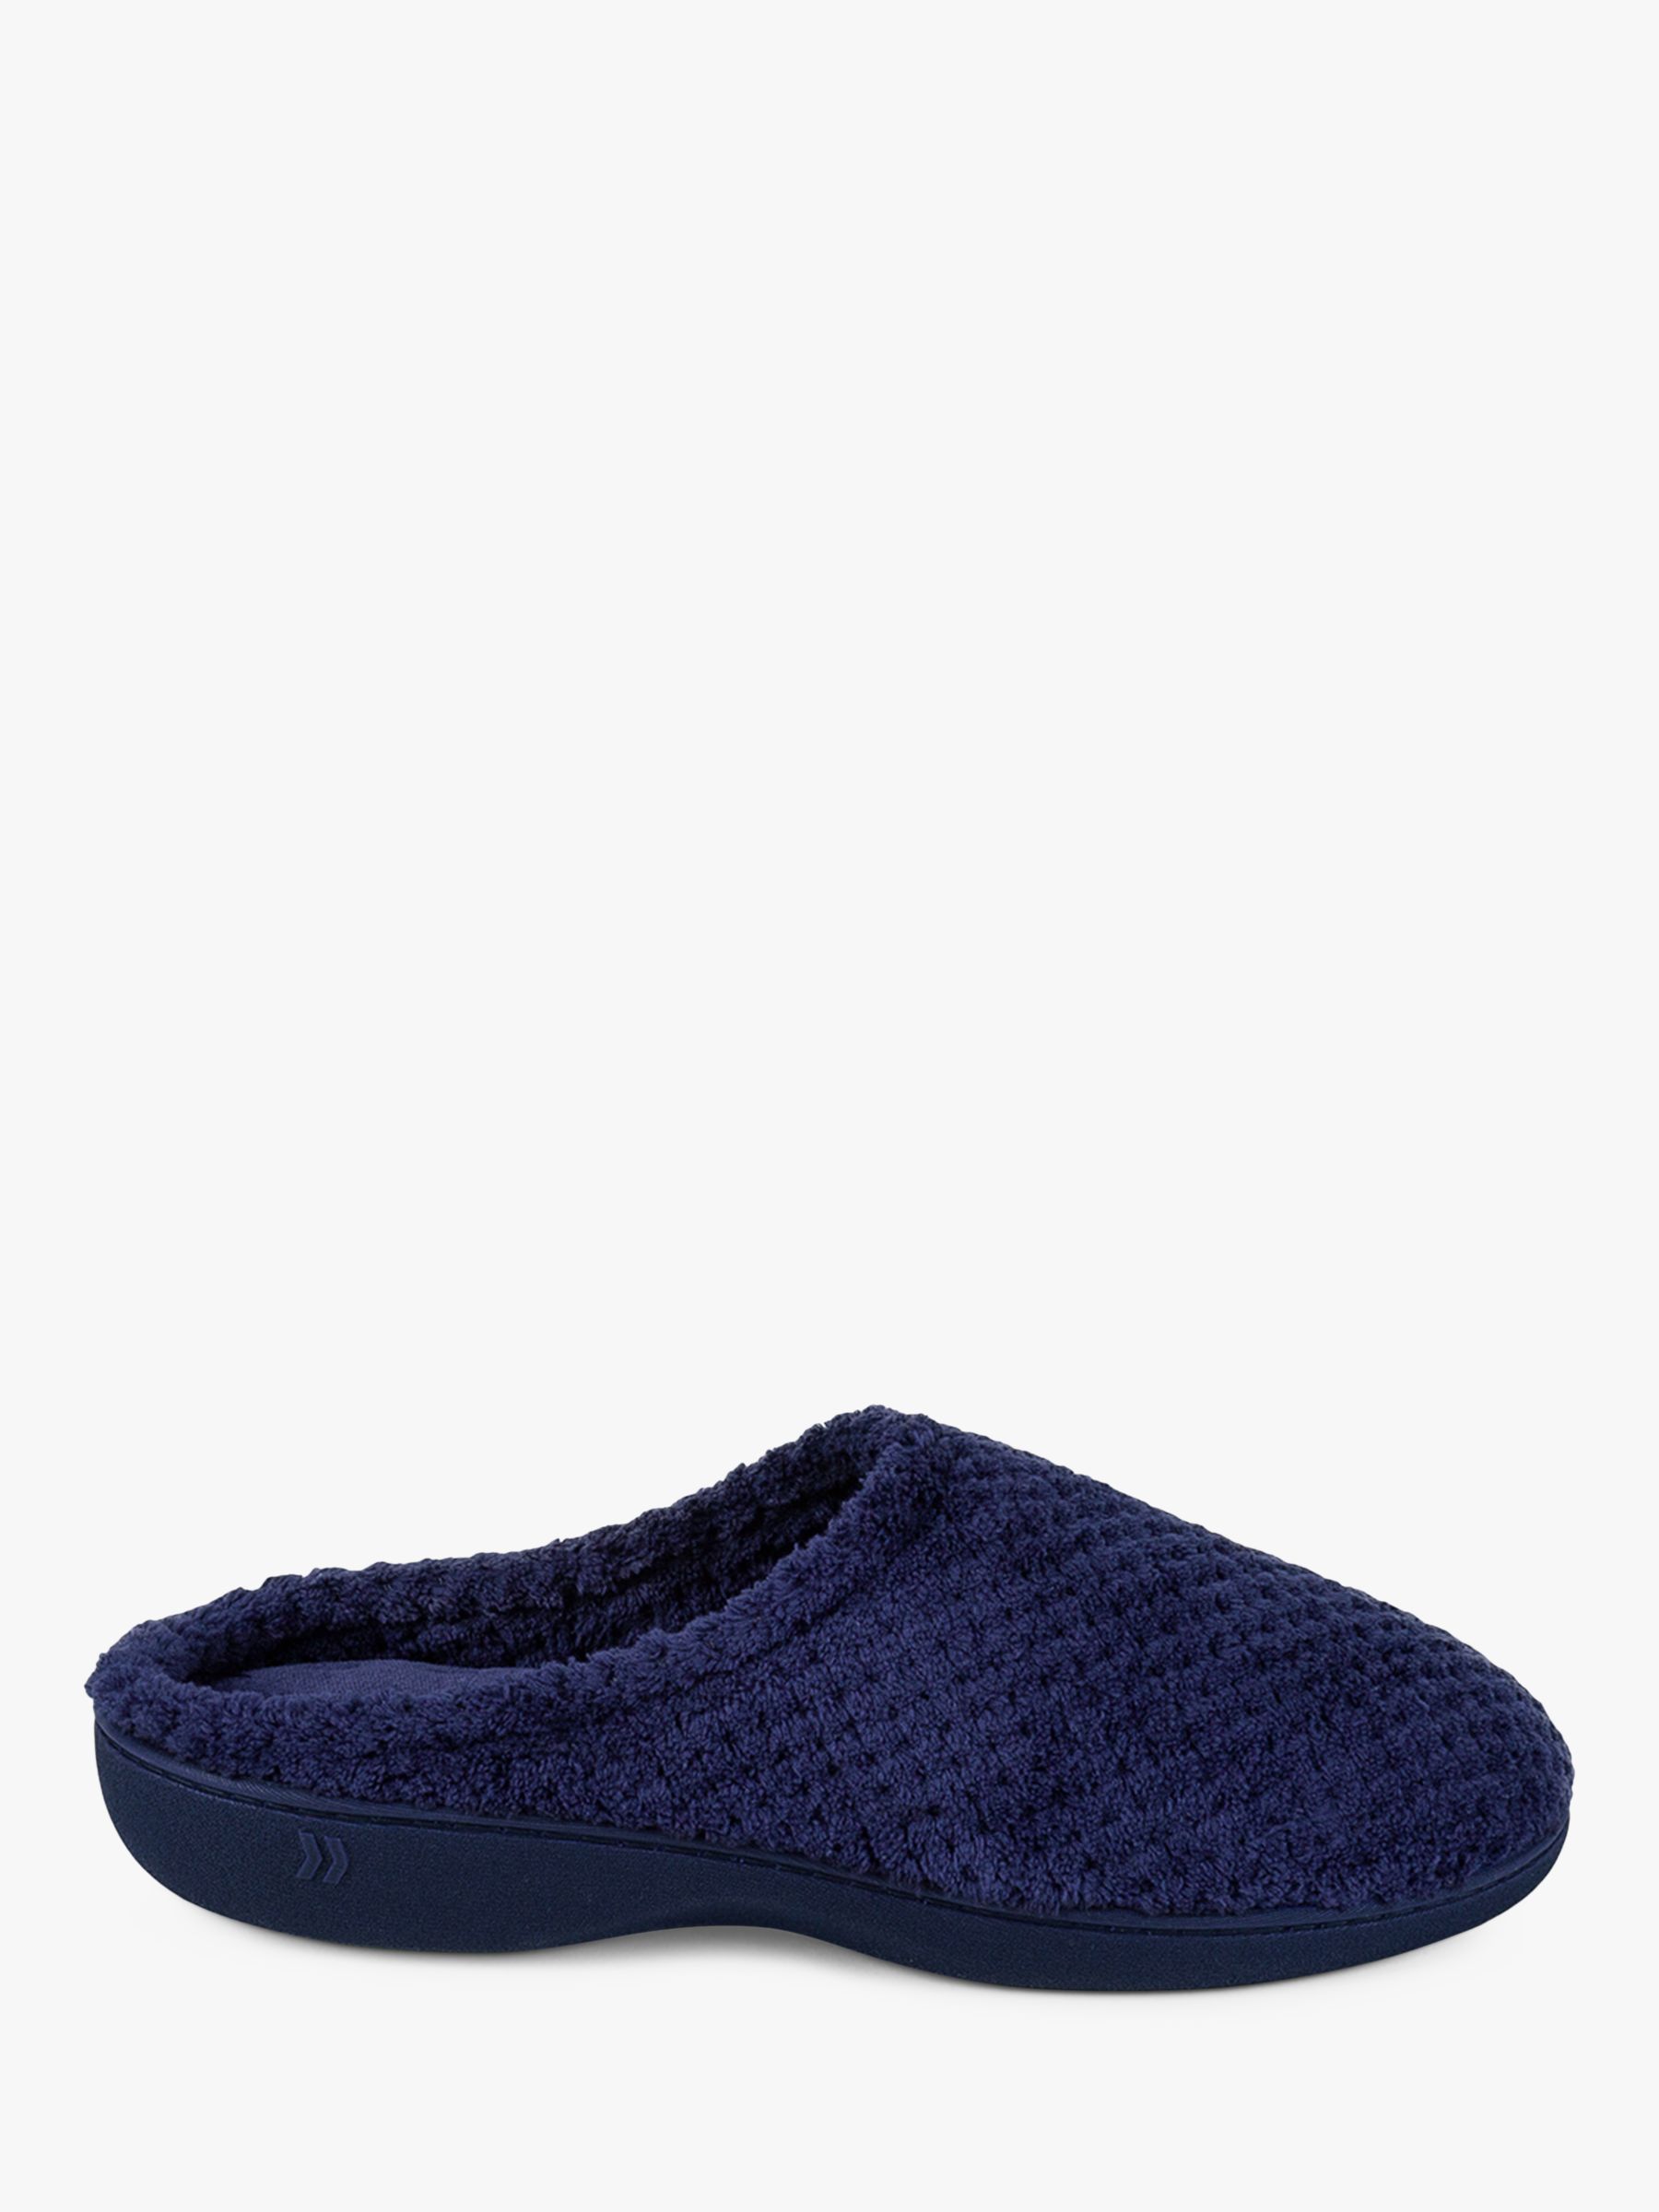 totes Popcorn Terry Mule Slippers, Navy at John Lewis & Partners